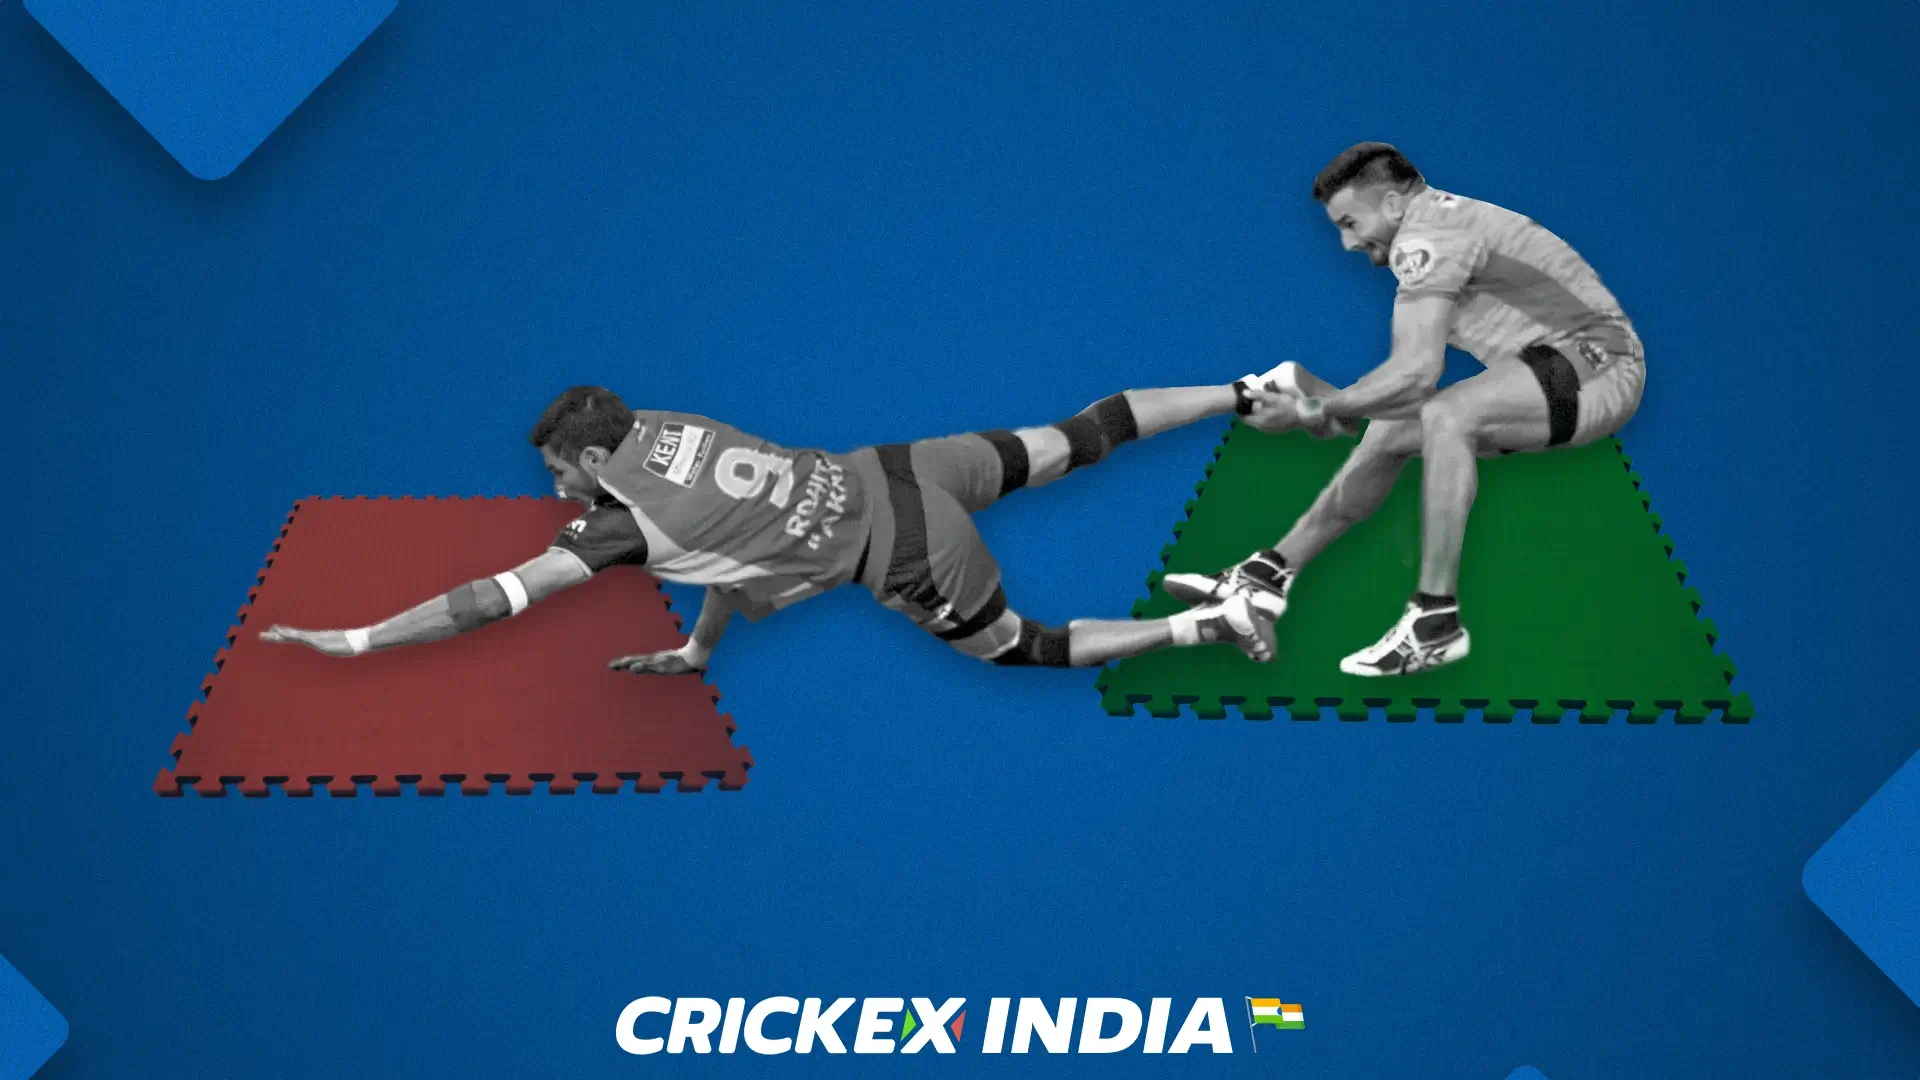 Bet on kabaddi and watch the match in real time with Crickex